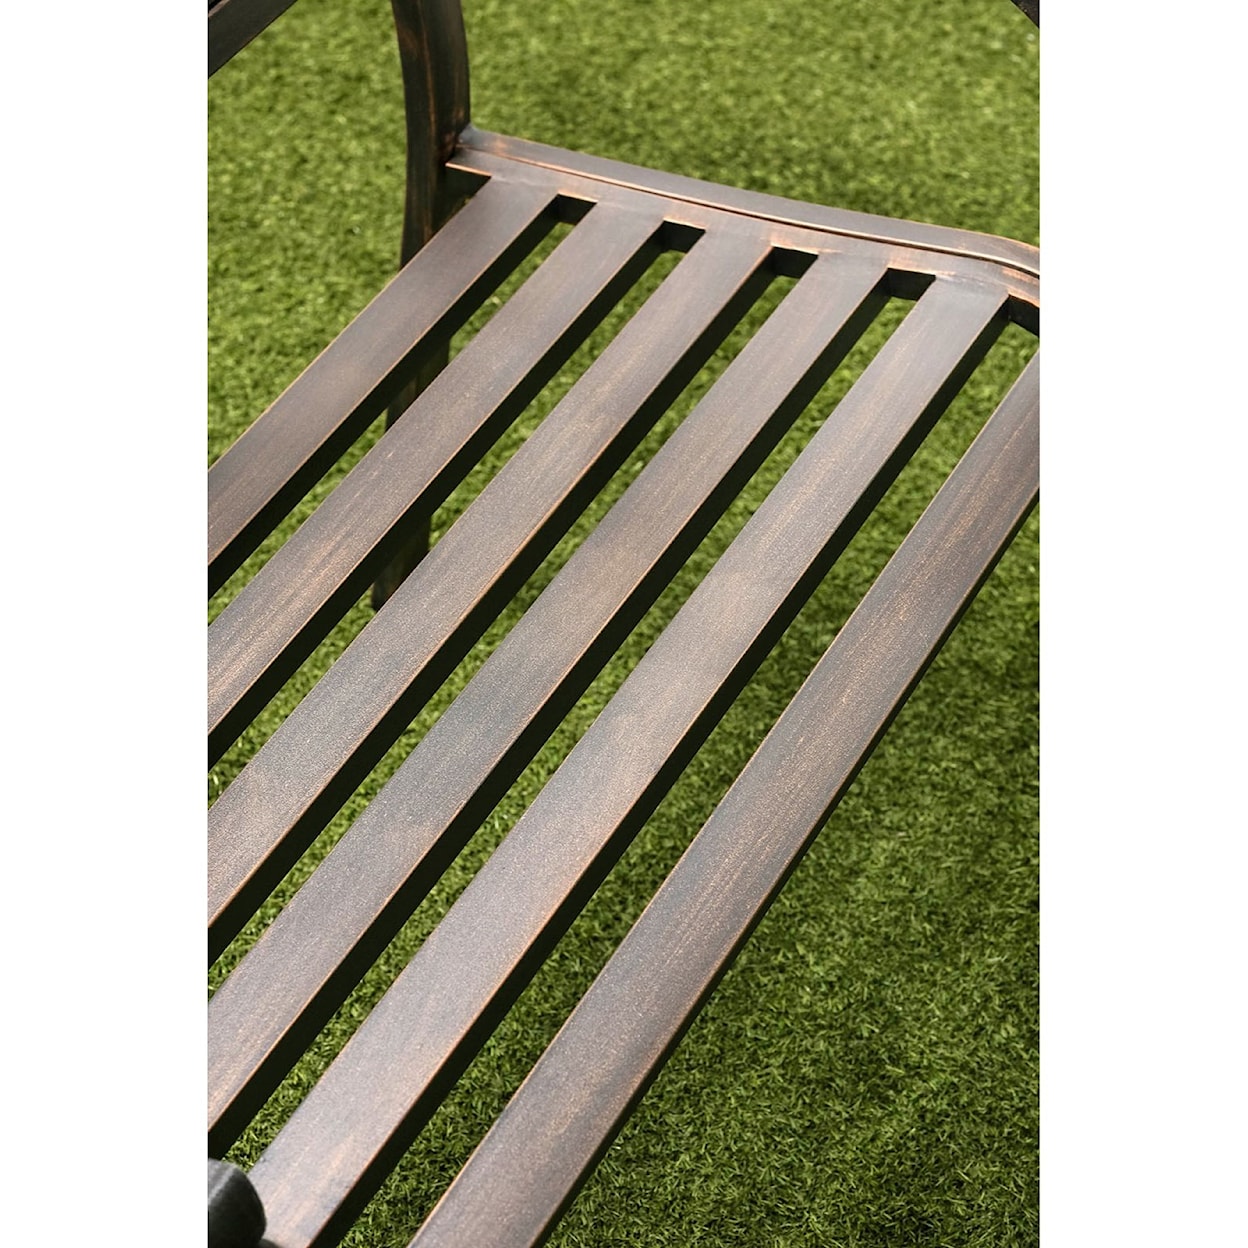 Furniture of America Potter Patio Steel Bench